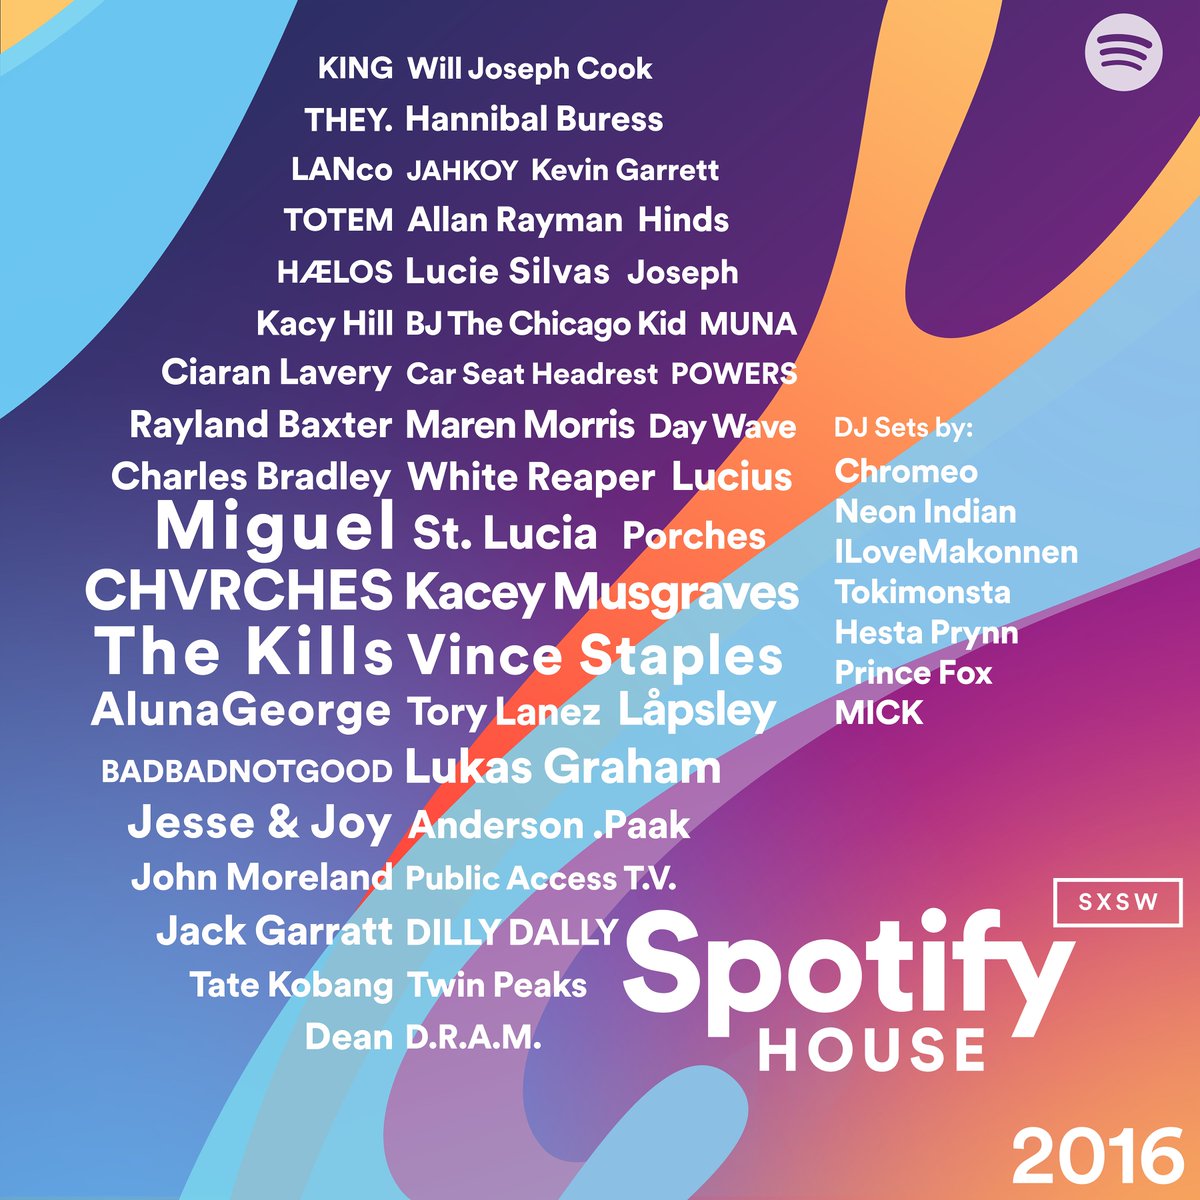 #SpotifyHouse #SXSW 2016 Come see us and our boys Lineup details at @Spotify RSVP at spotifyhouse.com/event/muna 🌹